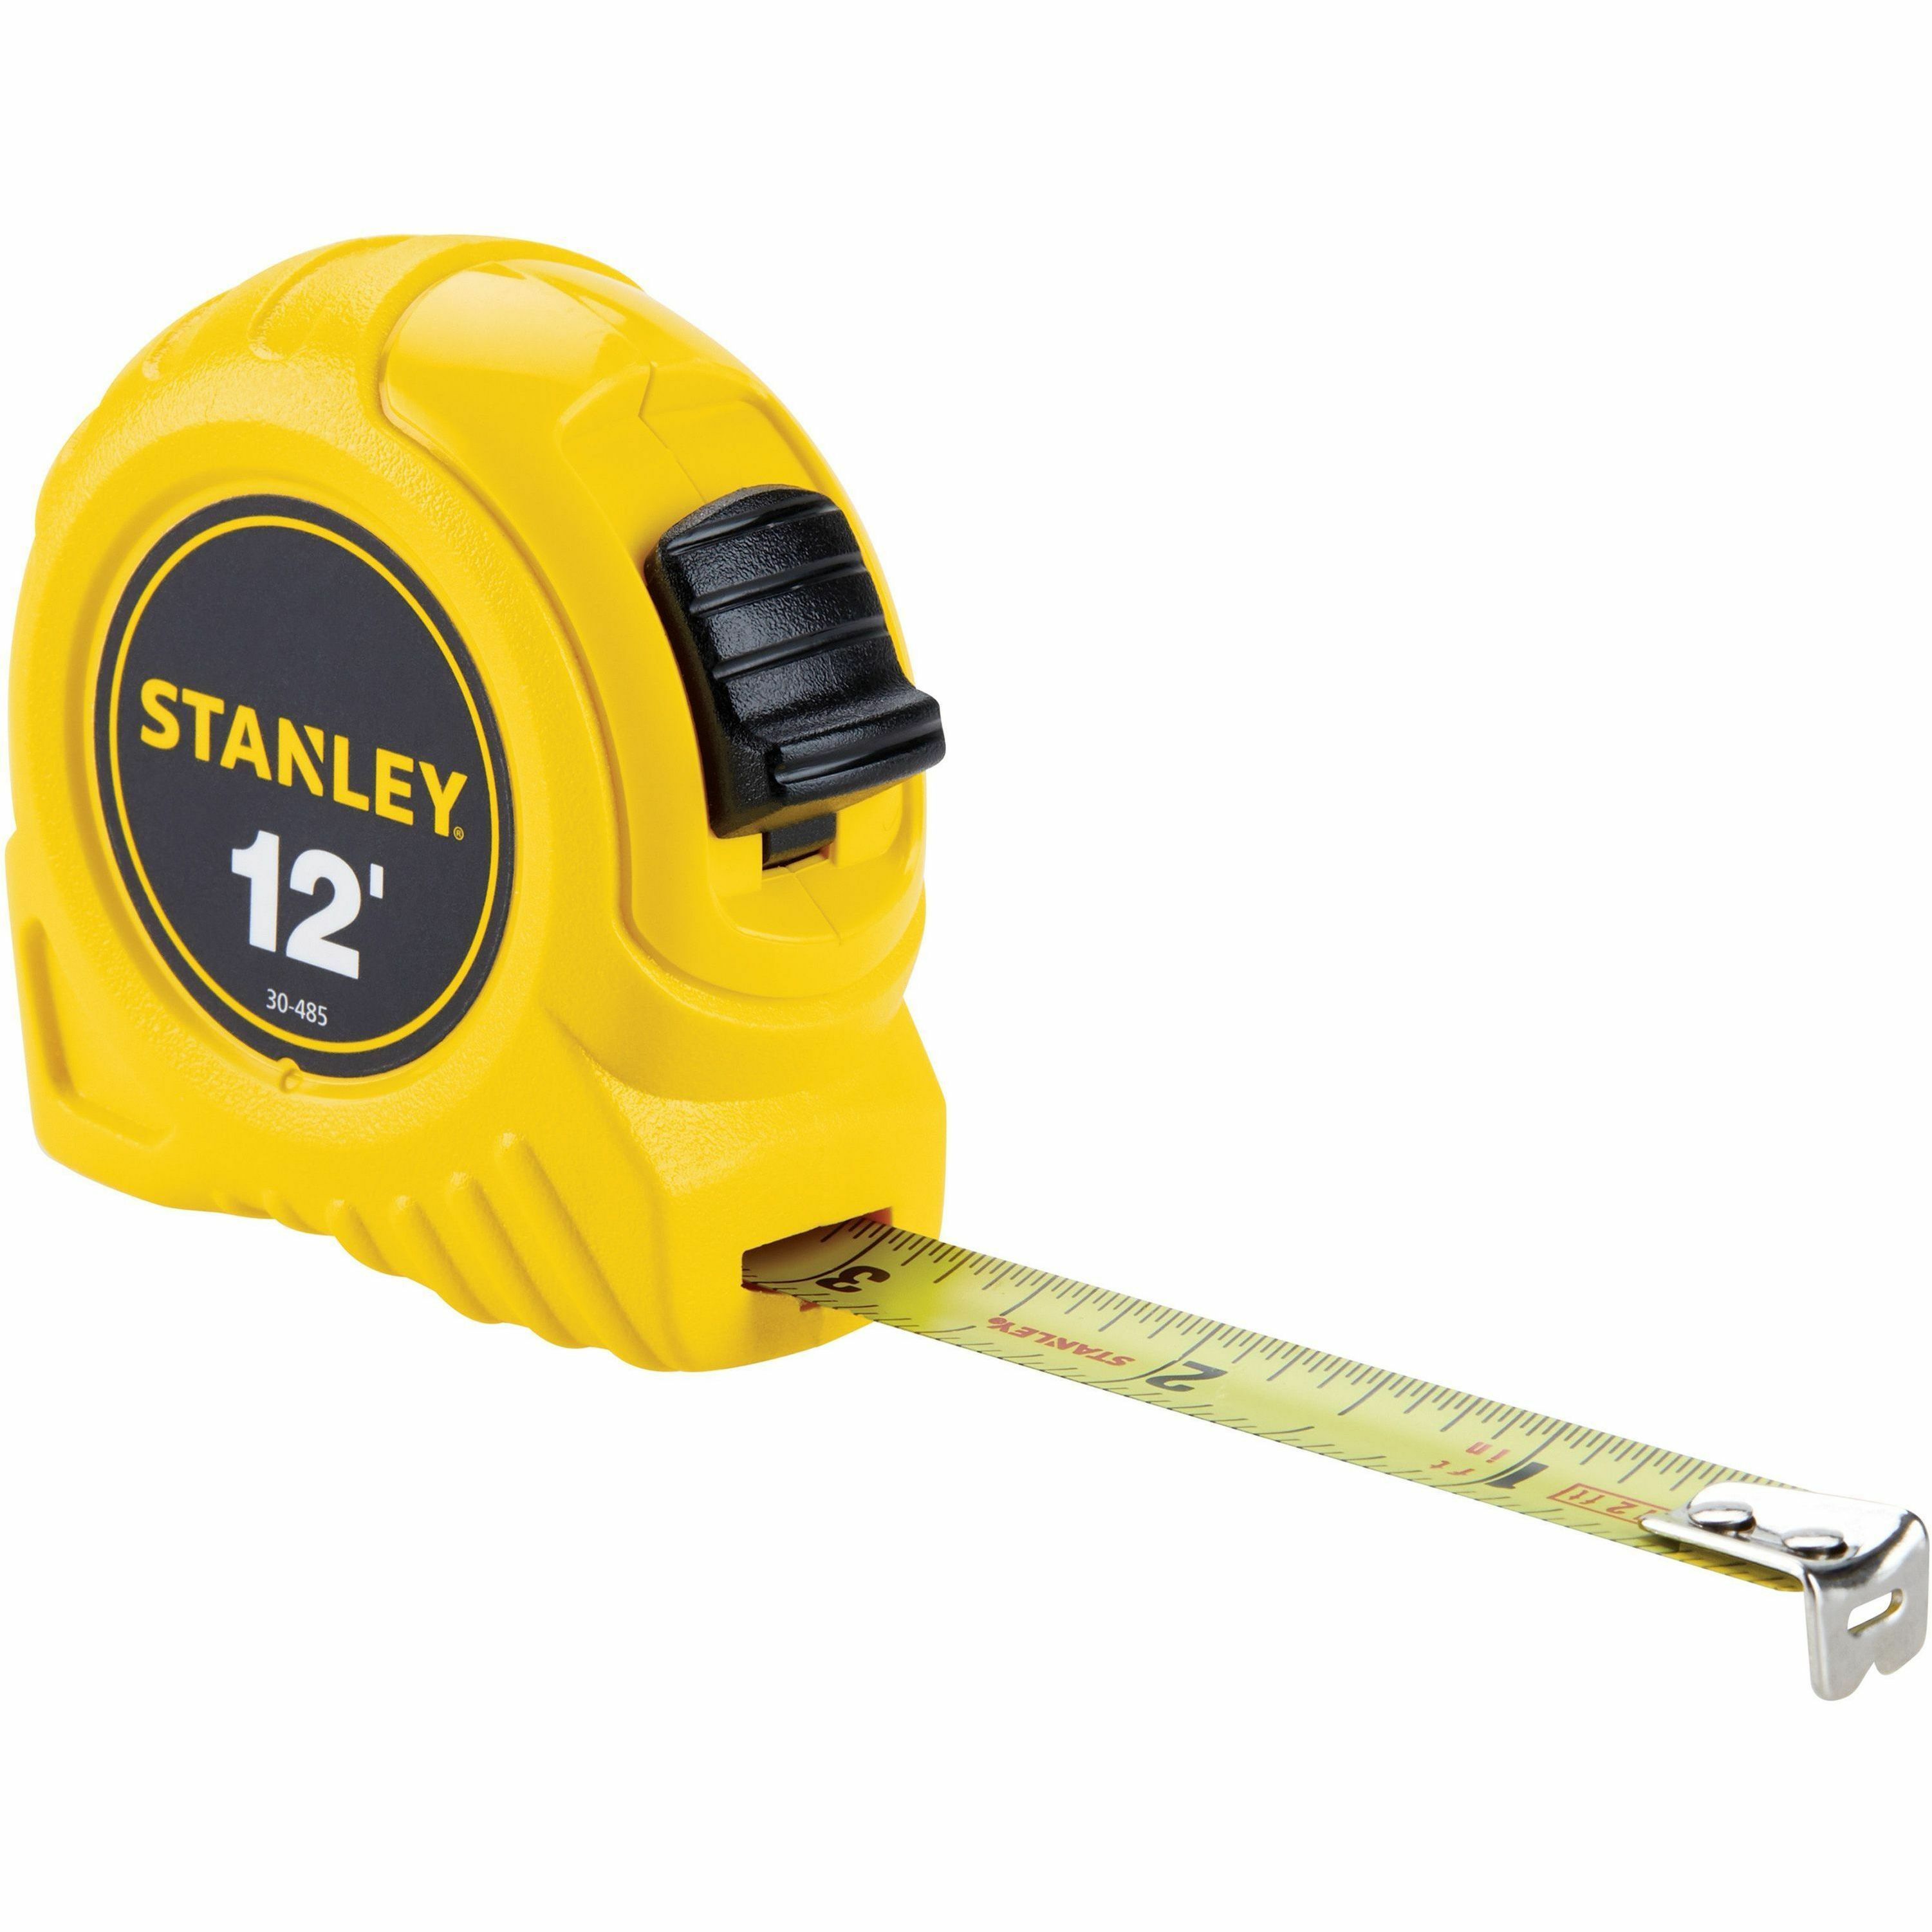 TAPE RULE ST-0-30-497 5 m STANLEY - Other Tools - Delta